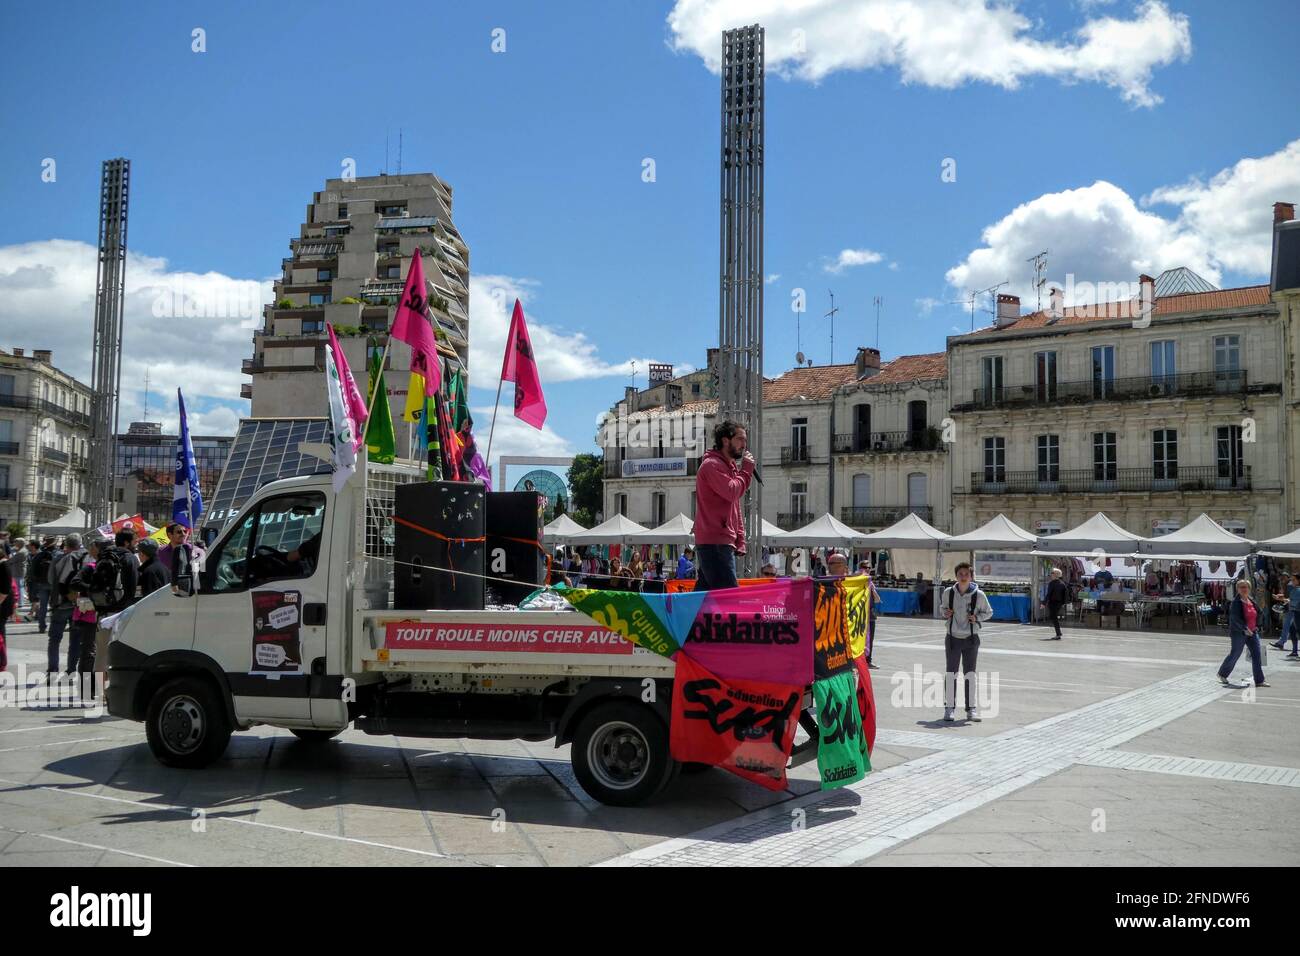 Union truck rallying people on Comedy Plaza, downtown Montpellier, Occitanie, South of France Stock Photo